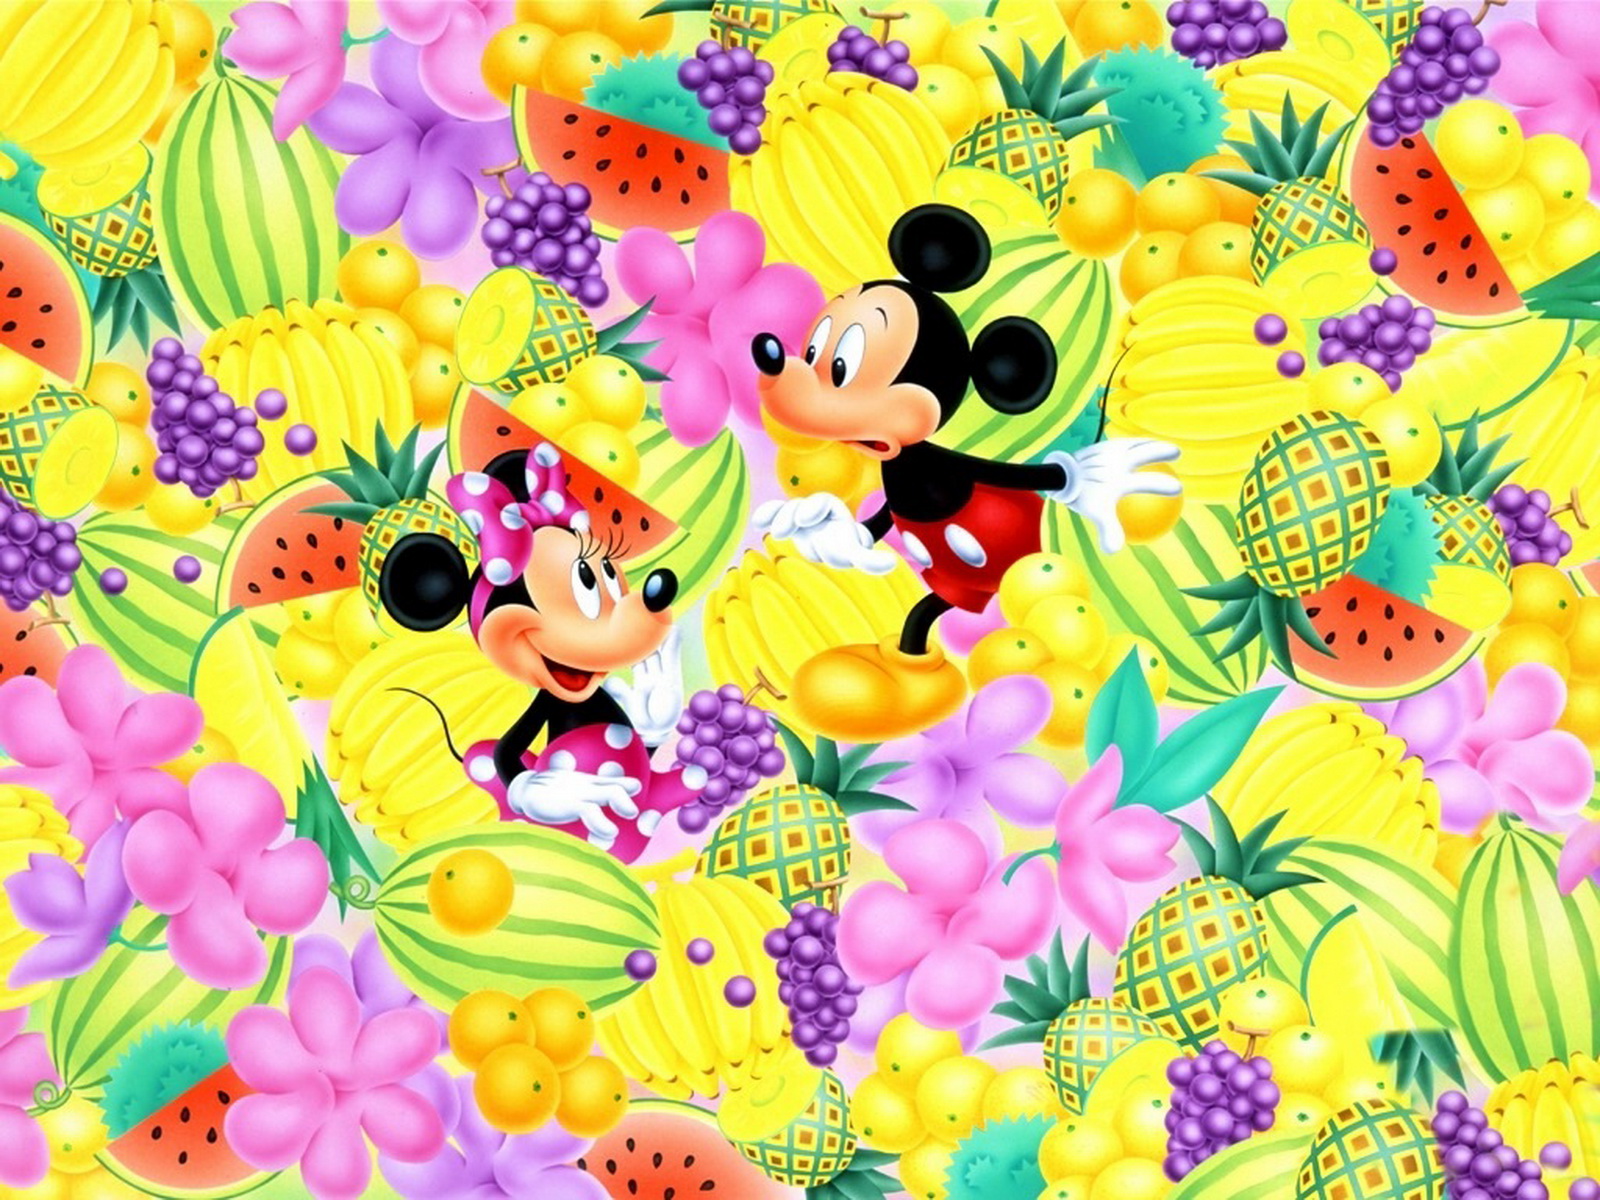 and Friends Wallpapers | Mickey mouse | Donald Duck | Chip 'n' Dale ...